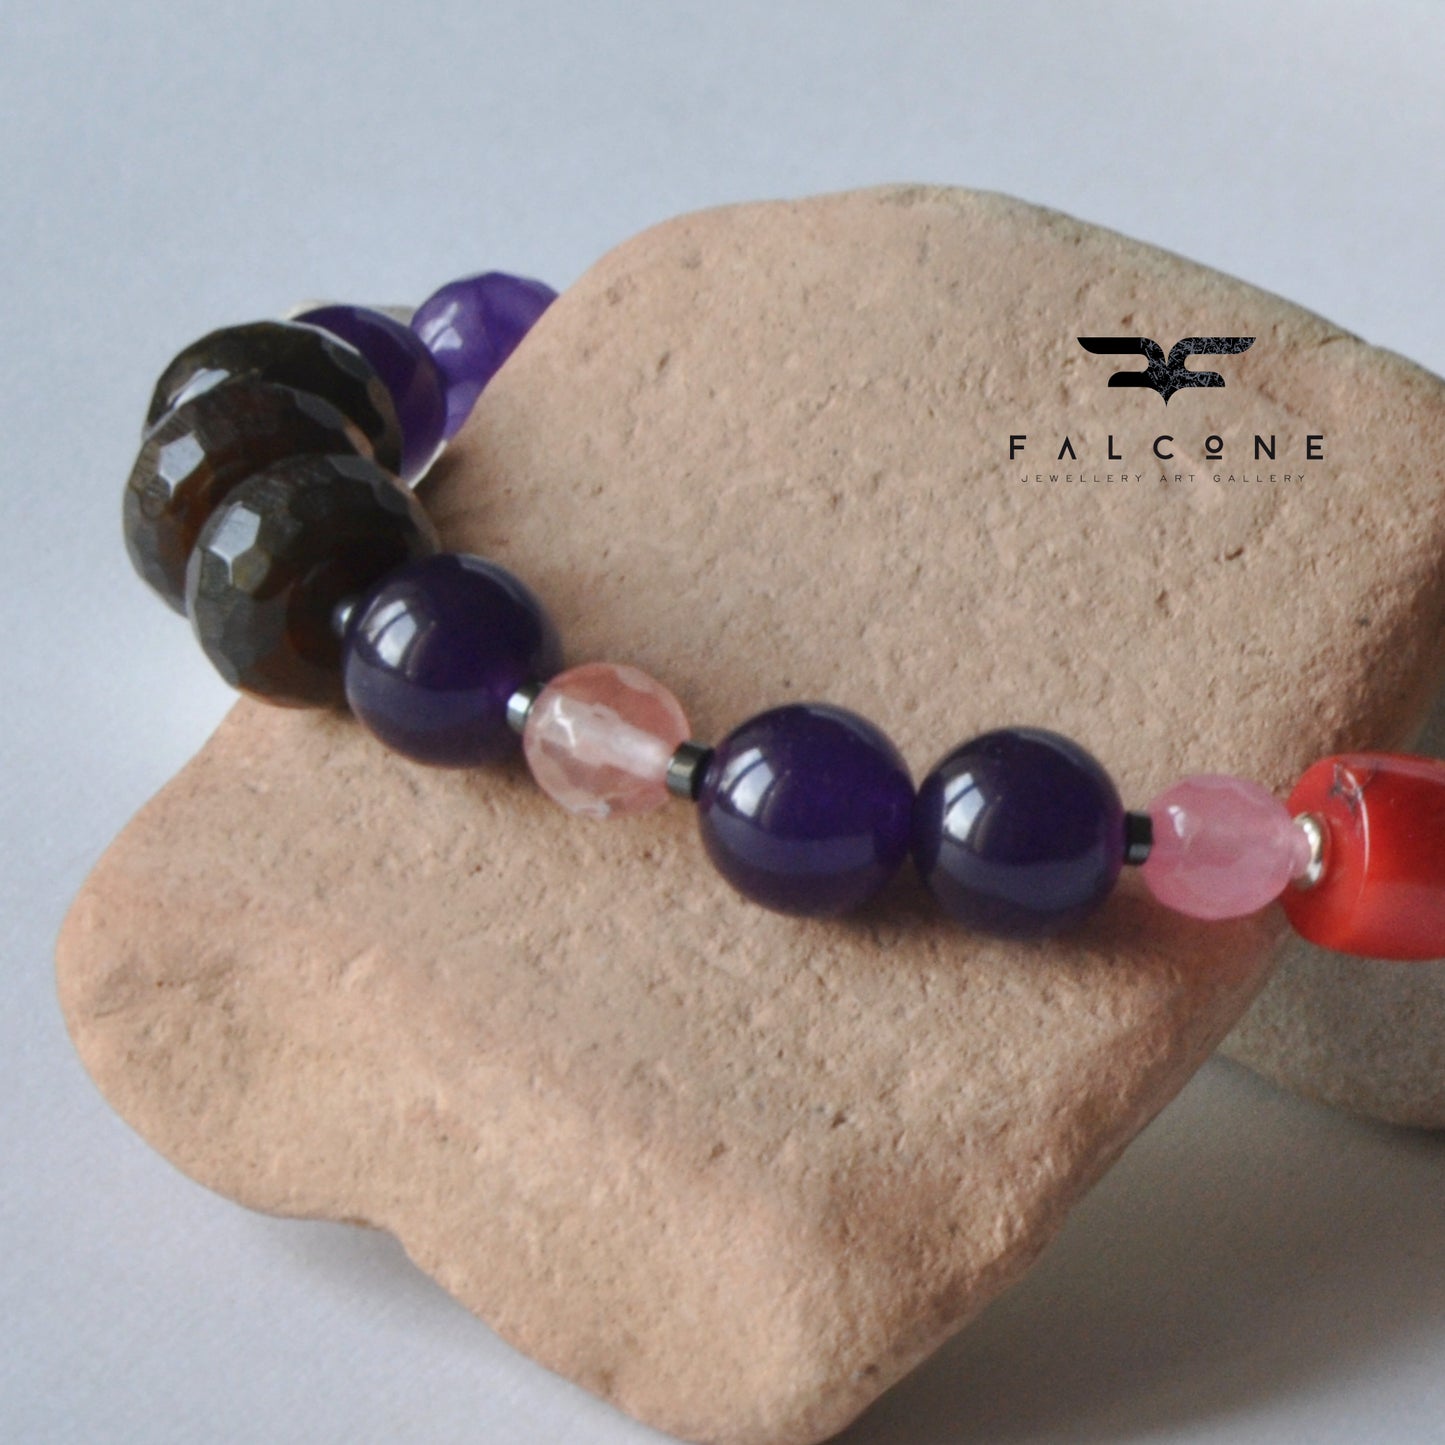 Adjustable bracelet of agates, quartz, opalite and red coral 'Purple and Coral'